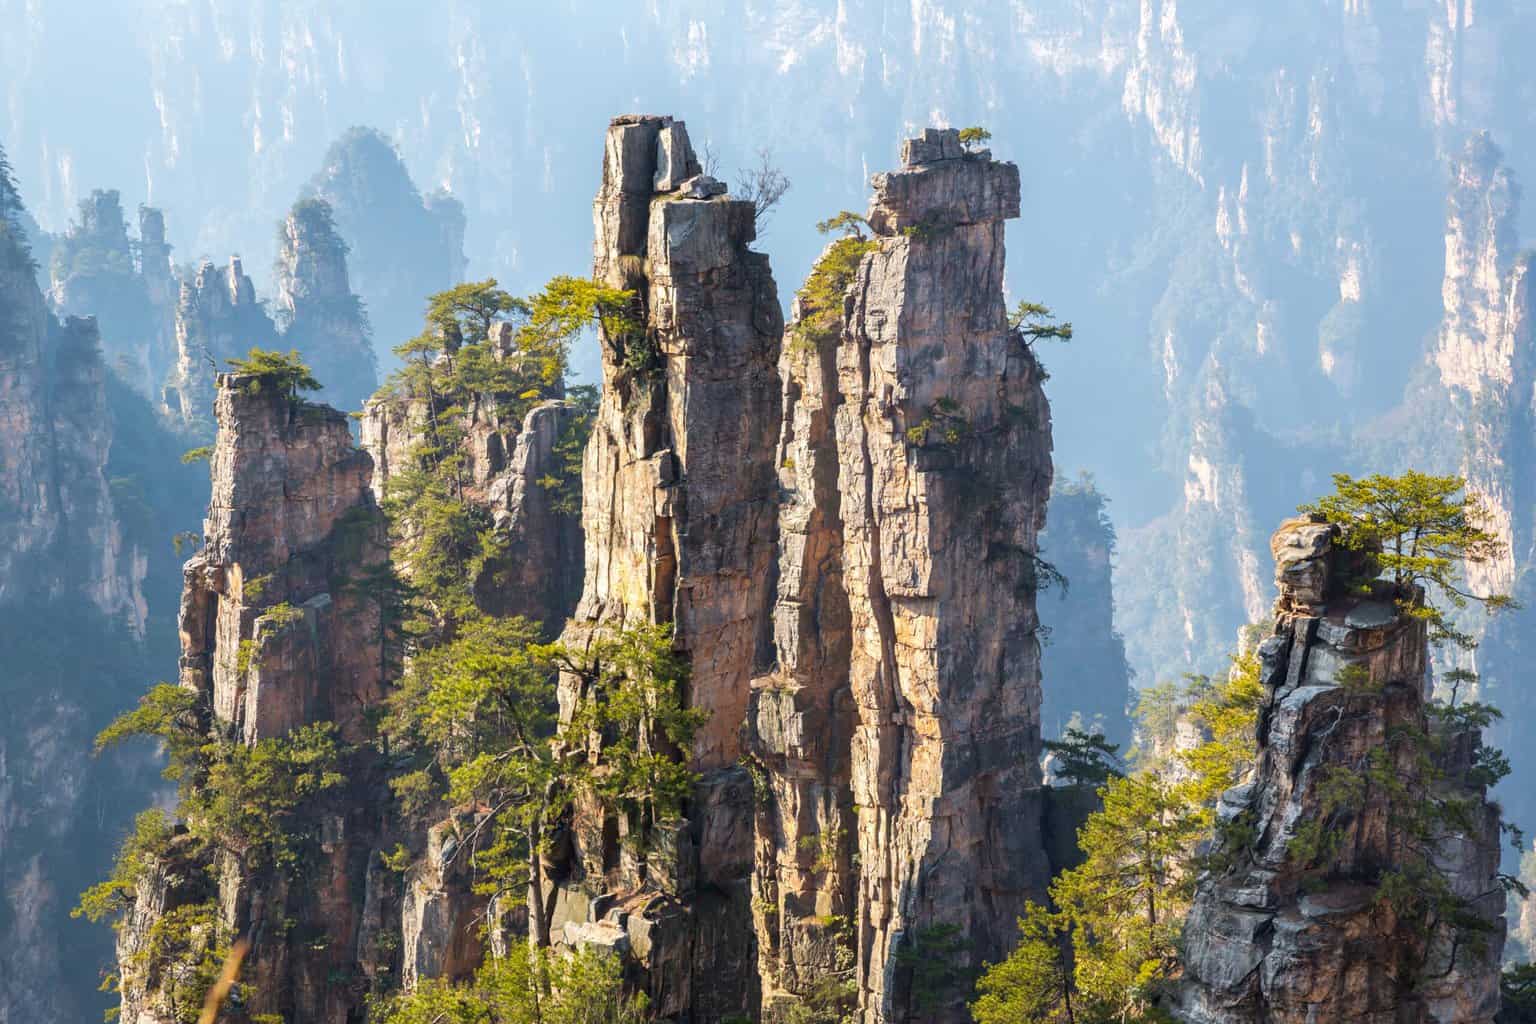 Zhangjiajie min scaled The Natural Wonders of the World are all incredible sights to behold in many parts of the world. All these places attract many tourists throughout the year. A global poll was made by the Seven Natural Wonders organization in 1997 and contained seven natural wonders, which are the Northern Lights, the Grand Canyon, Paricutin, Mount Everest, Harbor of Rio de Janeiro, Victoria Falls, and the Great Barrier Reef and there are much more but these are the most famous and the most admired across the globe.